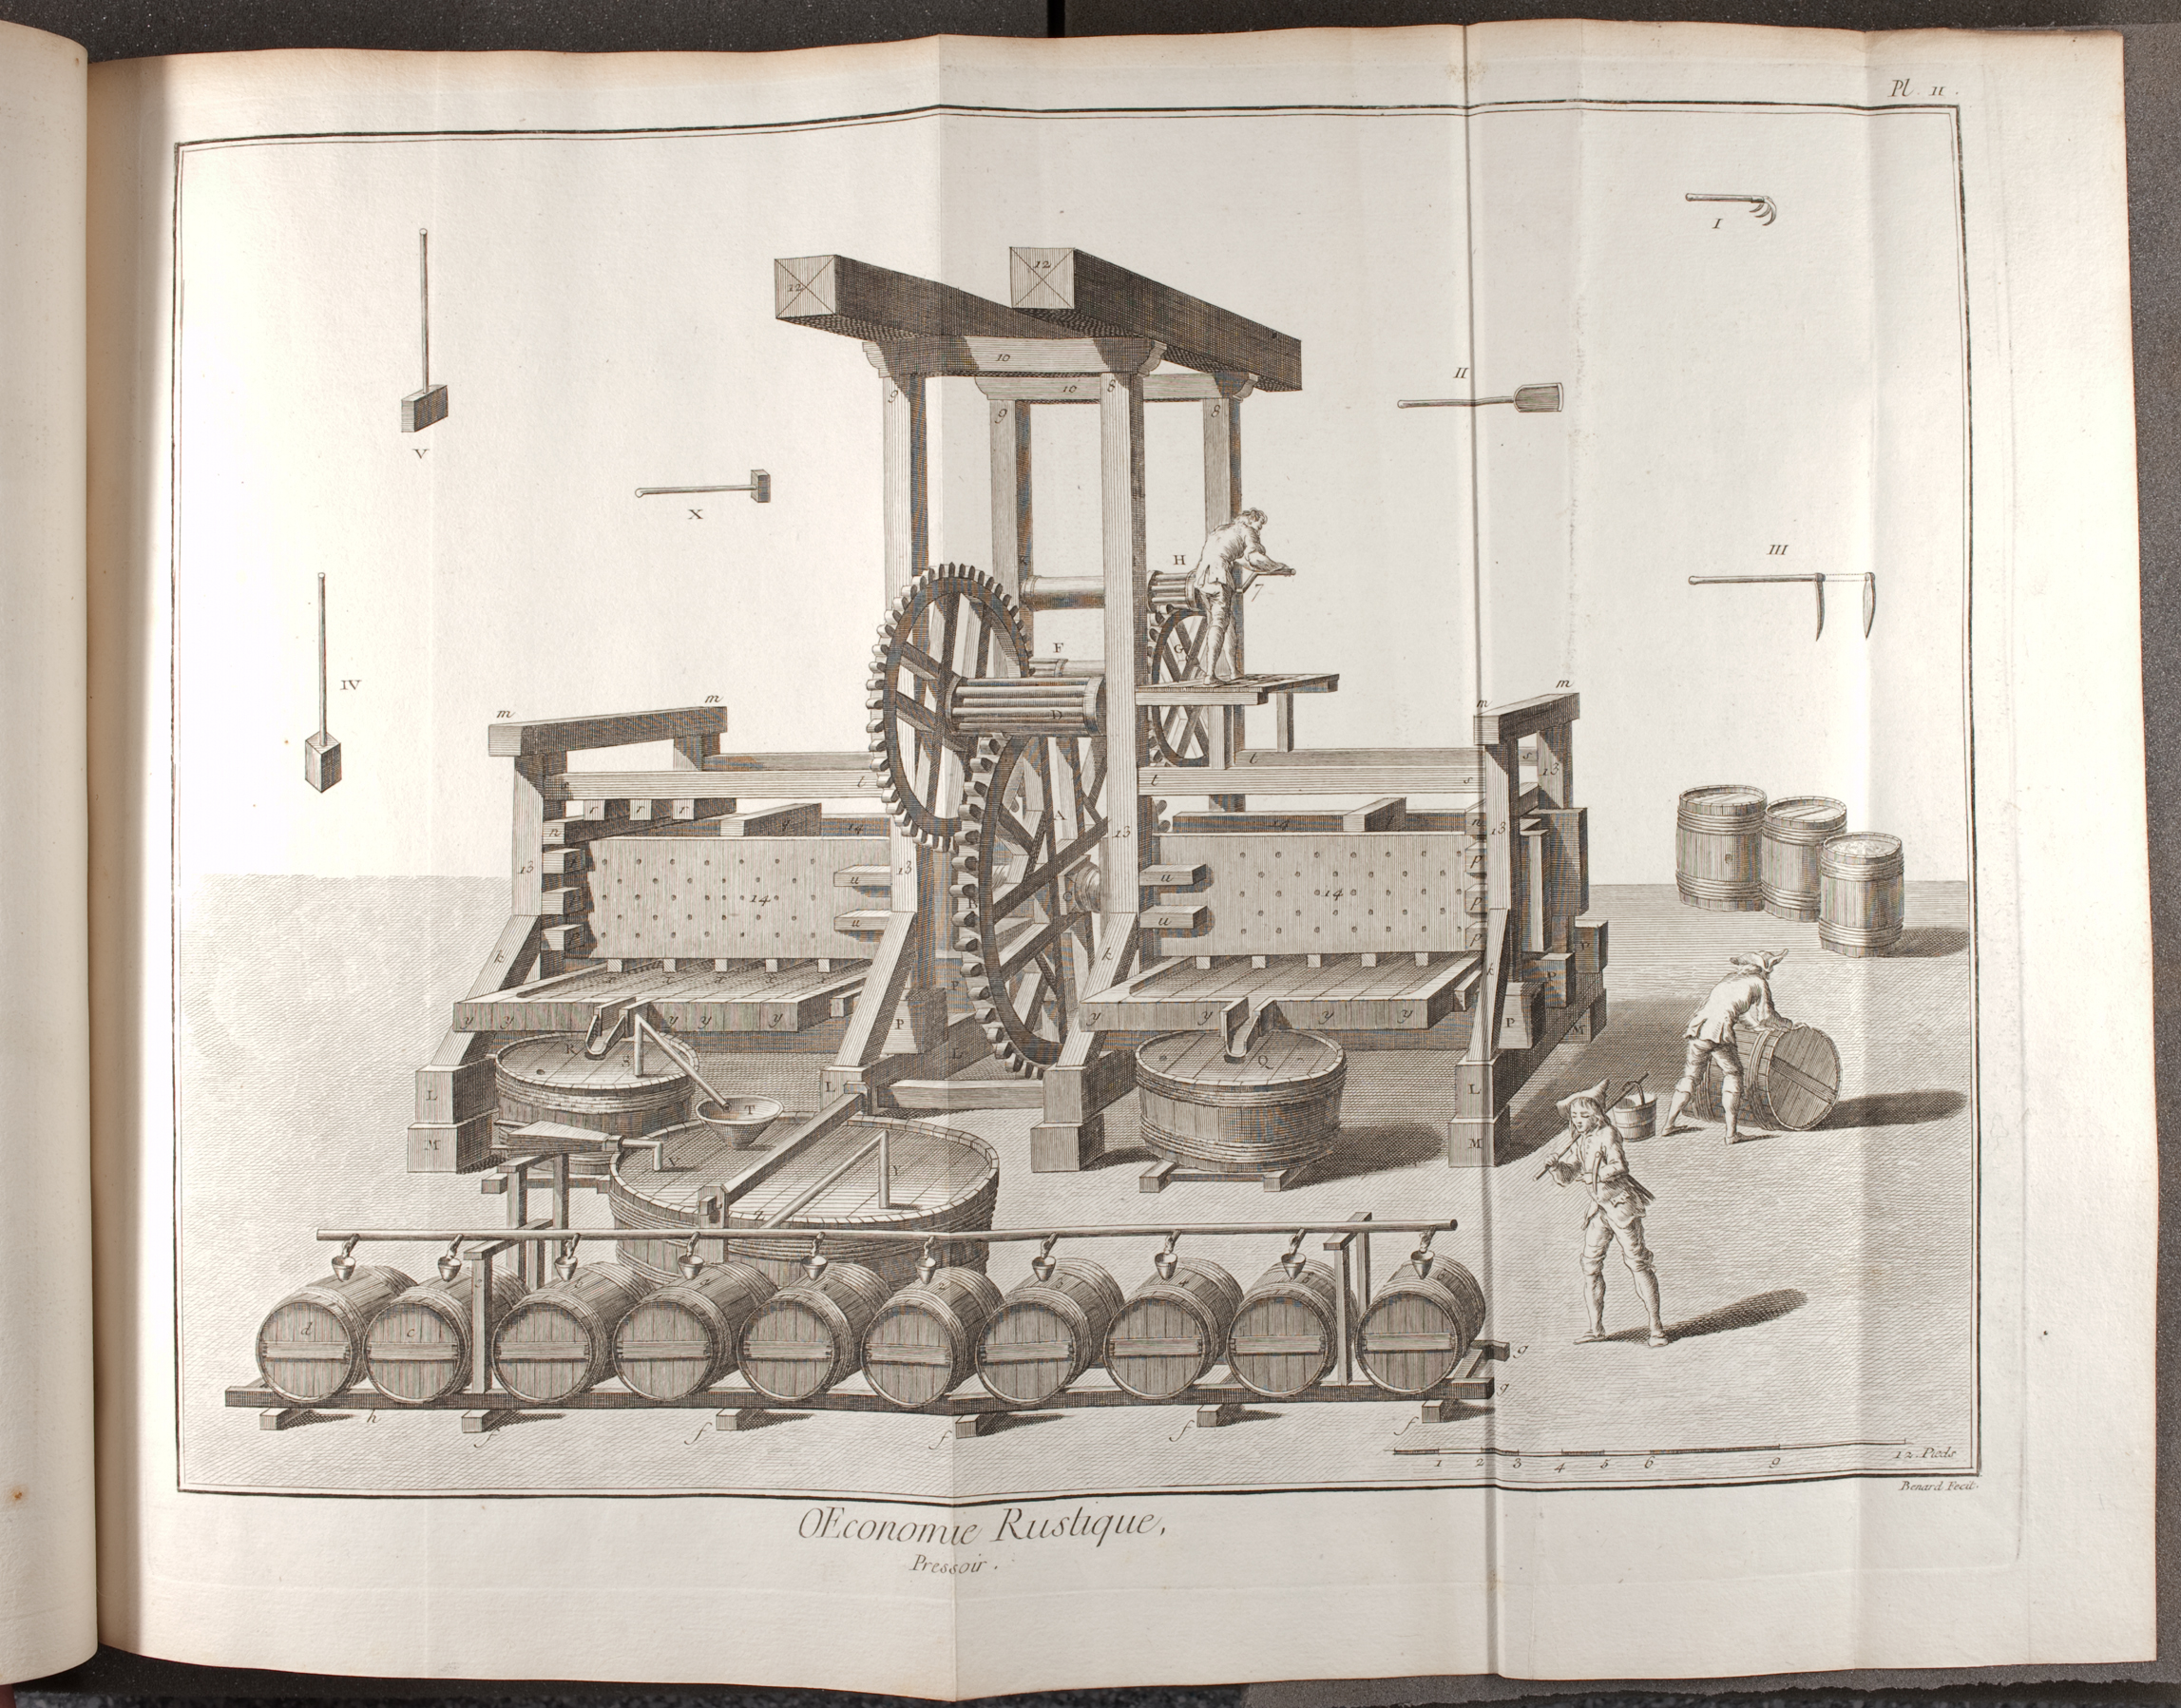 Plate depicting "Oeconomie Rustique, Pressoir" from Diderot & d’Alembert’s Encyclopédie (St Andrews copy at =sf AE25.D5)